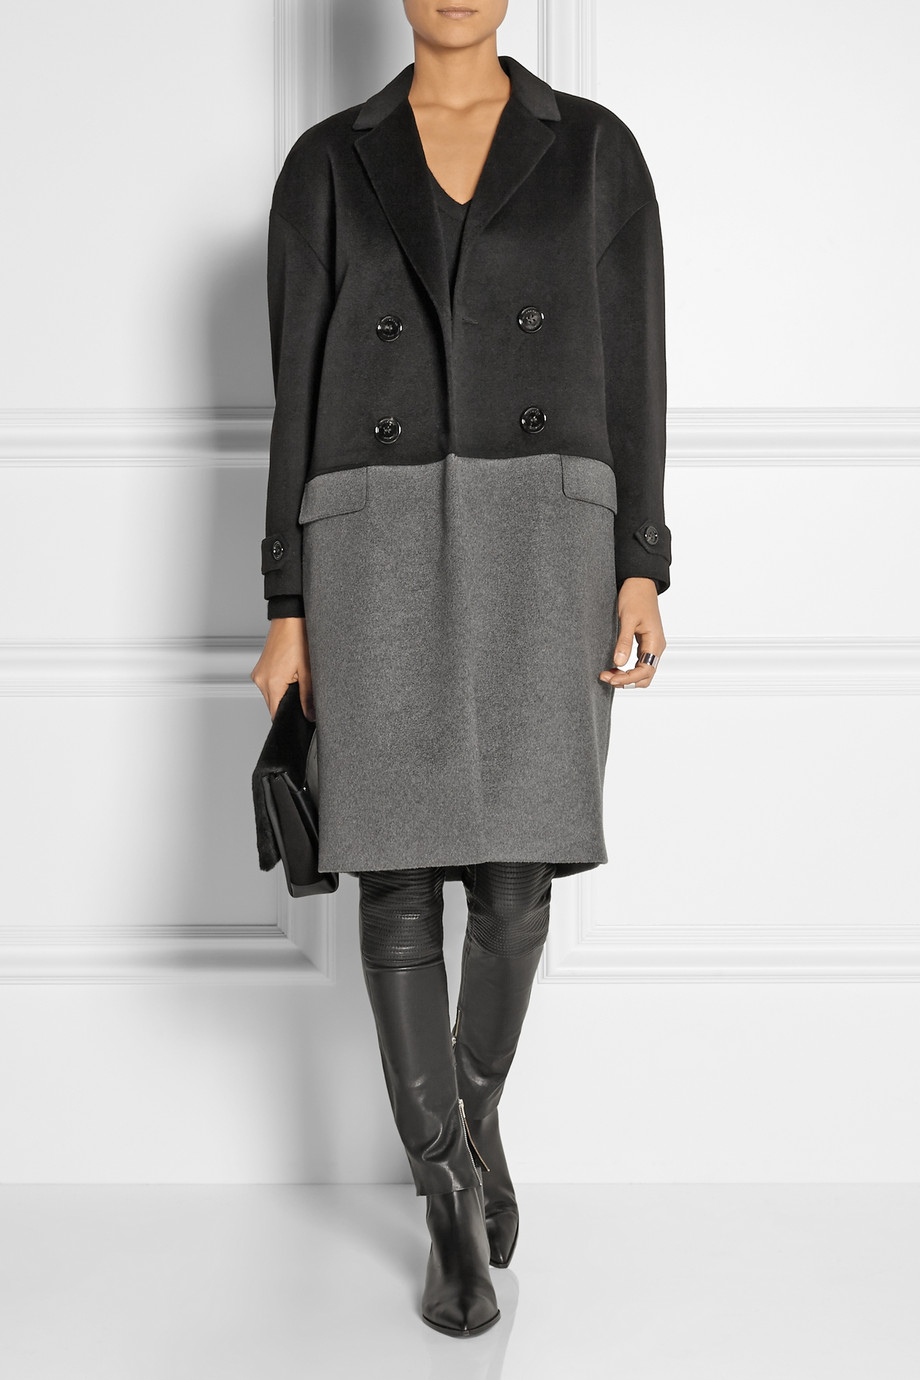 Lyst - Burberry Two-Tone Cashmere Coat in Black